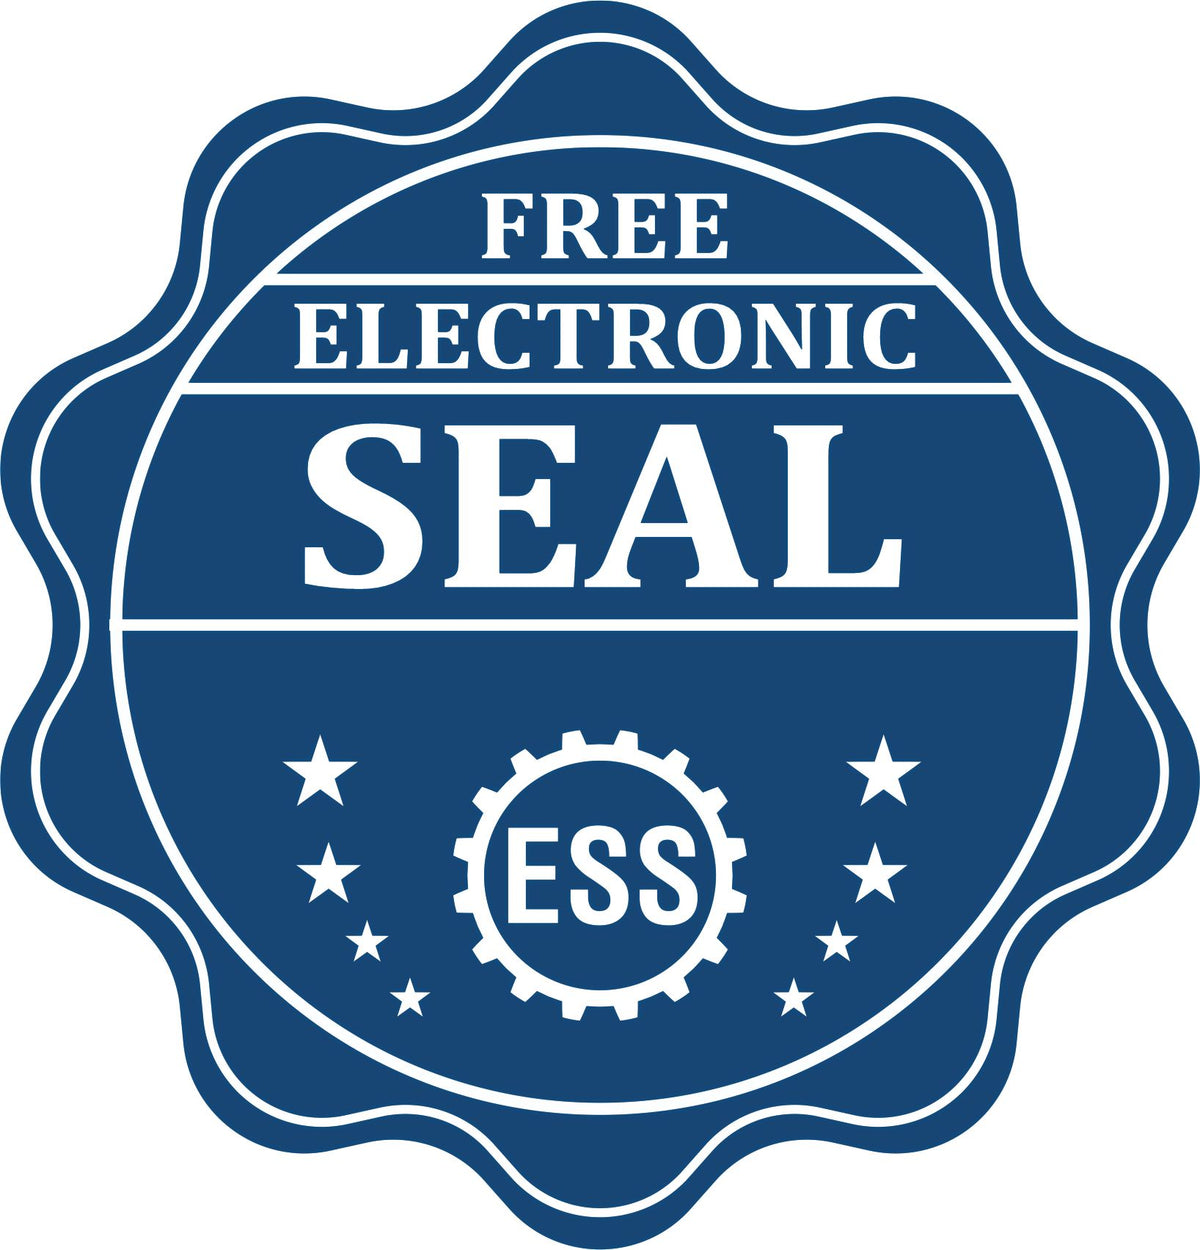 A badge showing a free electronic seal for the Wooden Handle Oregon Rectangular Notary Public Stamp with stars and the ESS gear on the emblem.